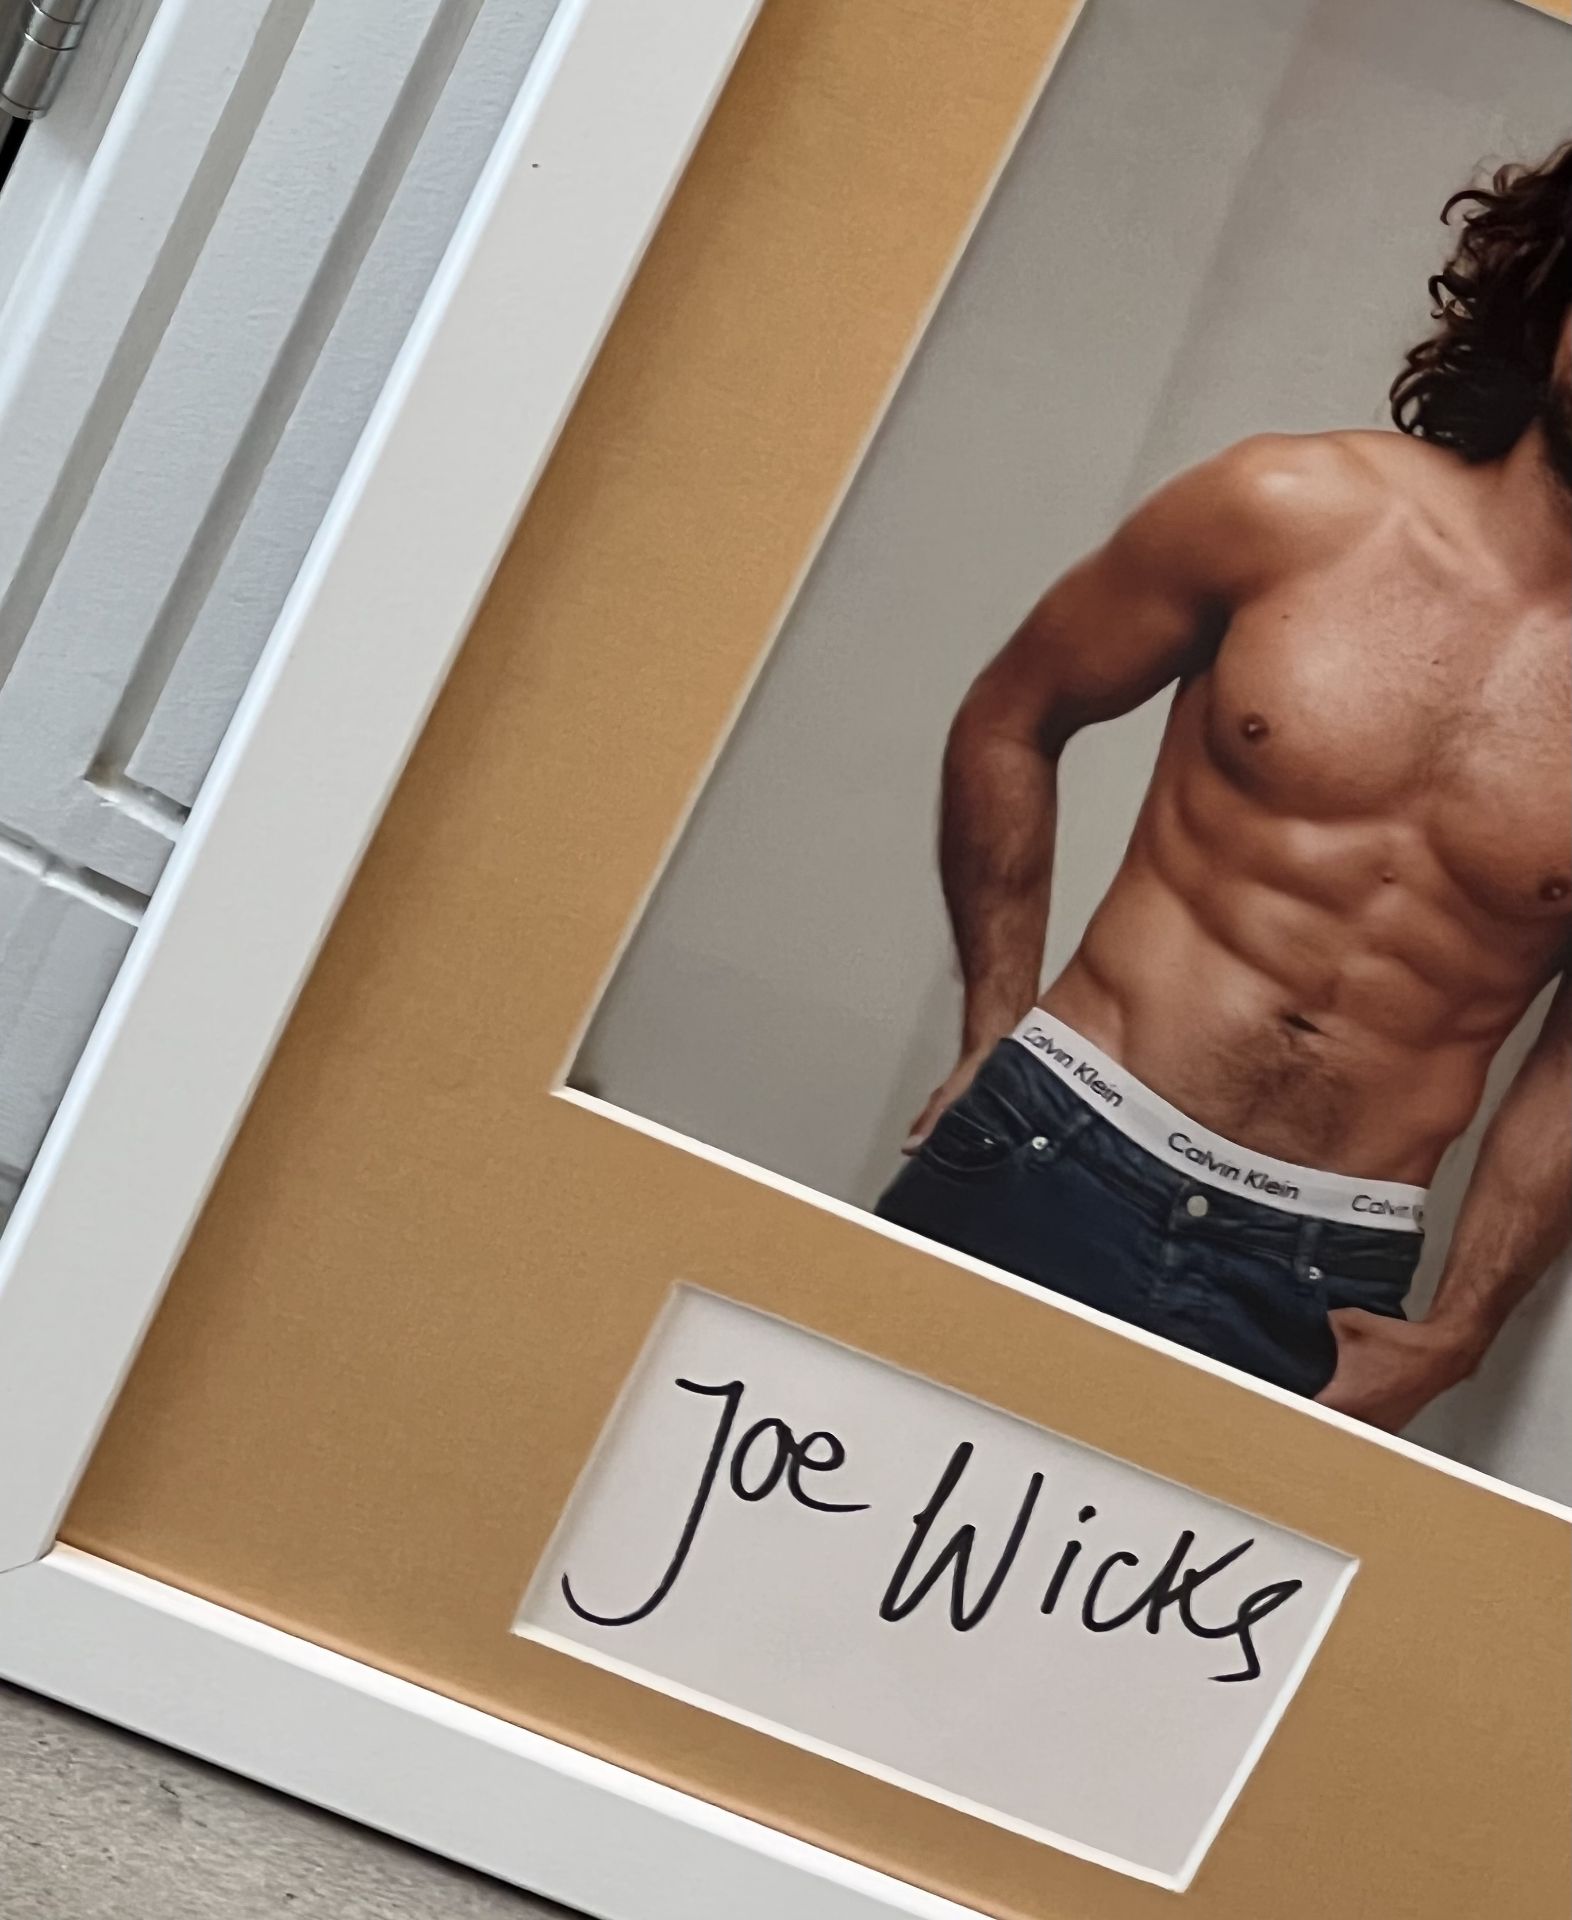 Authentic HAND SIGNED Presentation by ‘Joe Wicks’ with COA - Image 2 of 4